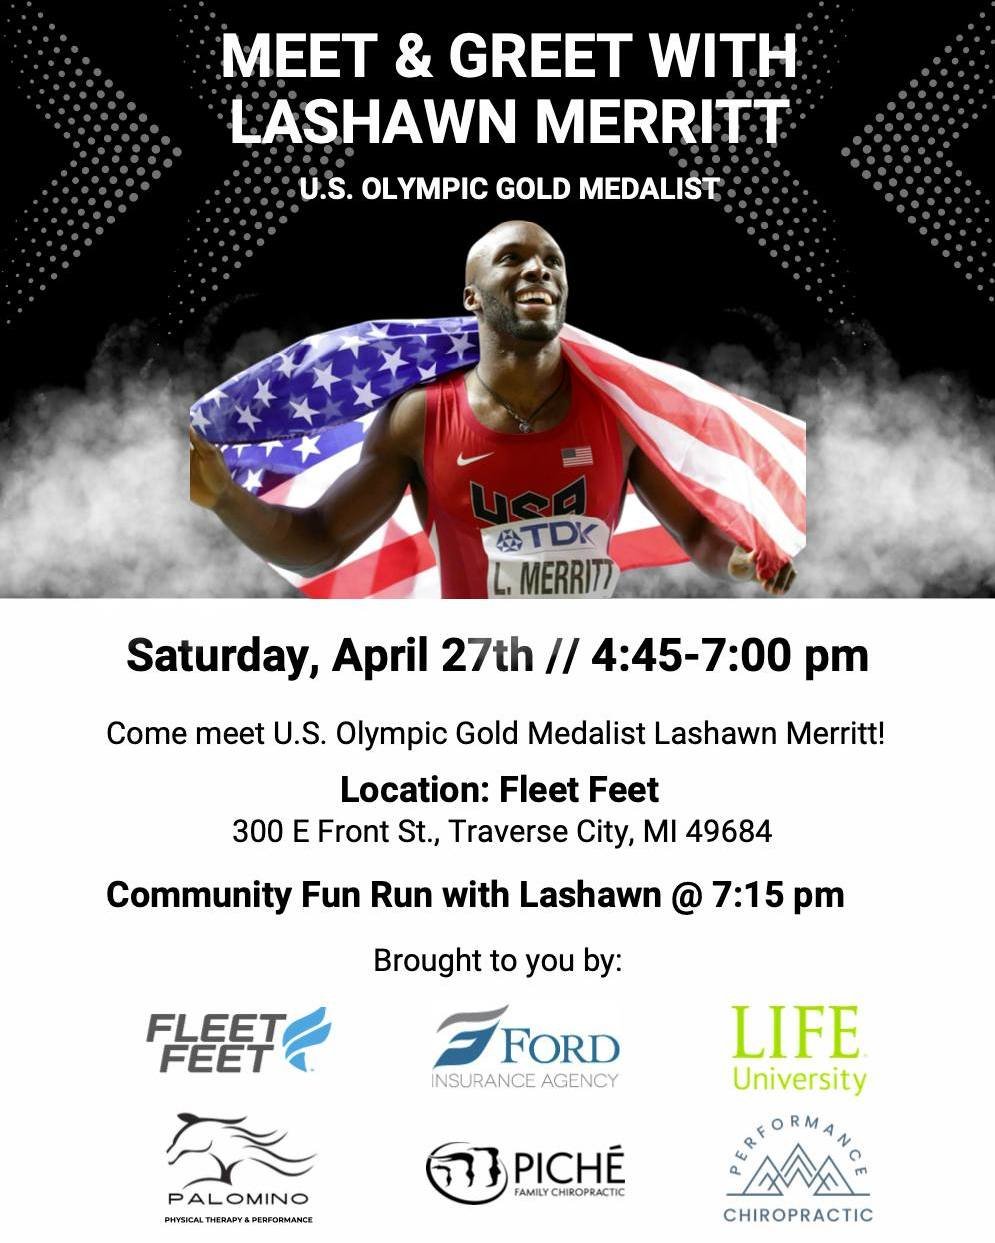 LaShawn Merritt, US Olympic Gold medalist runner is going to be at FLEET FEET in downtown Traverse City this Saturday from 4:45-7pm. Take selfies, get autographs and wear his gold medal as you get a pic with LaShawn!!! (Funds raised go to support The